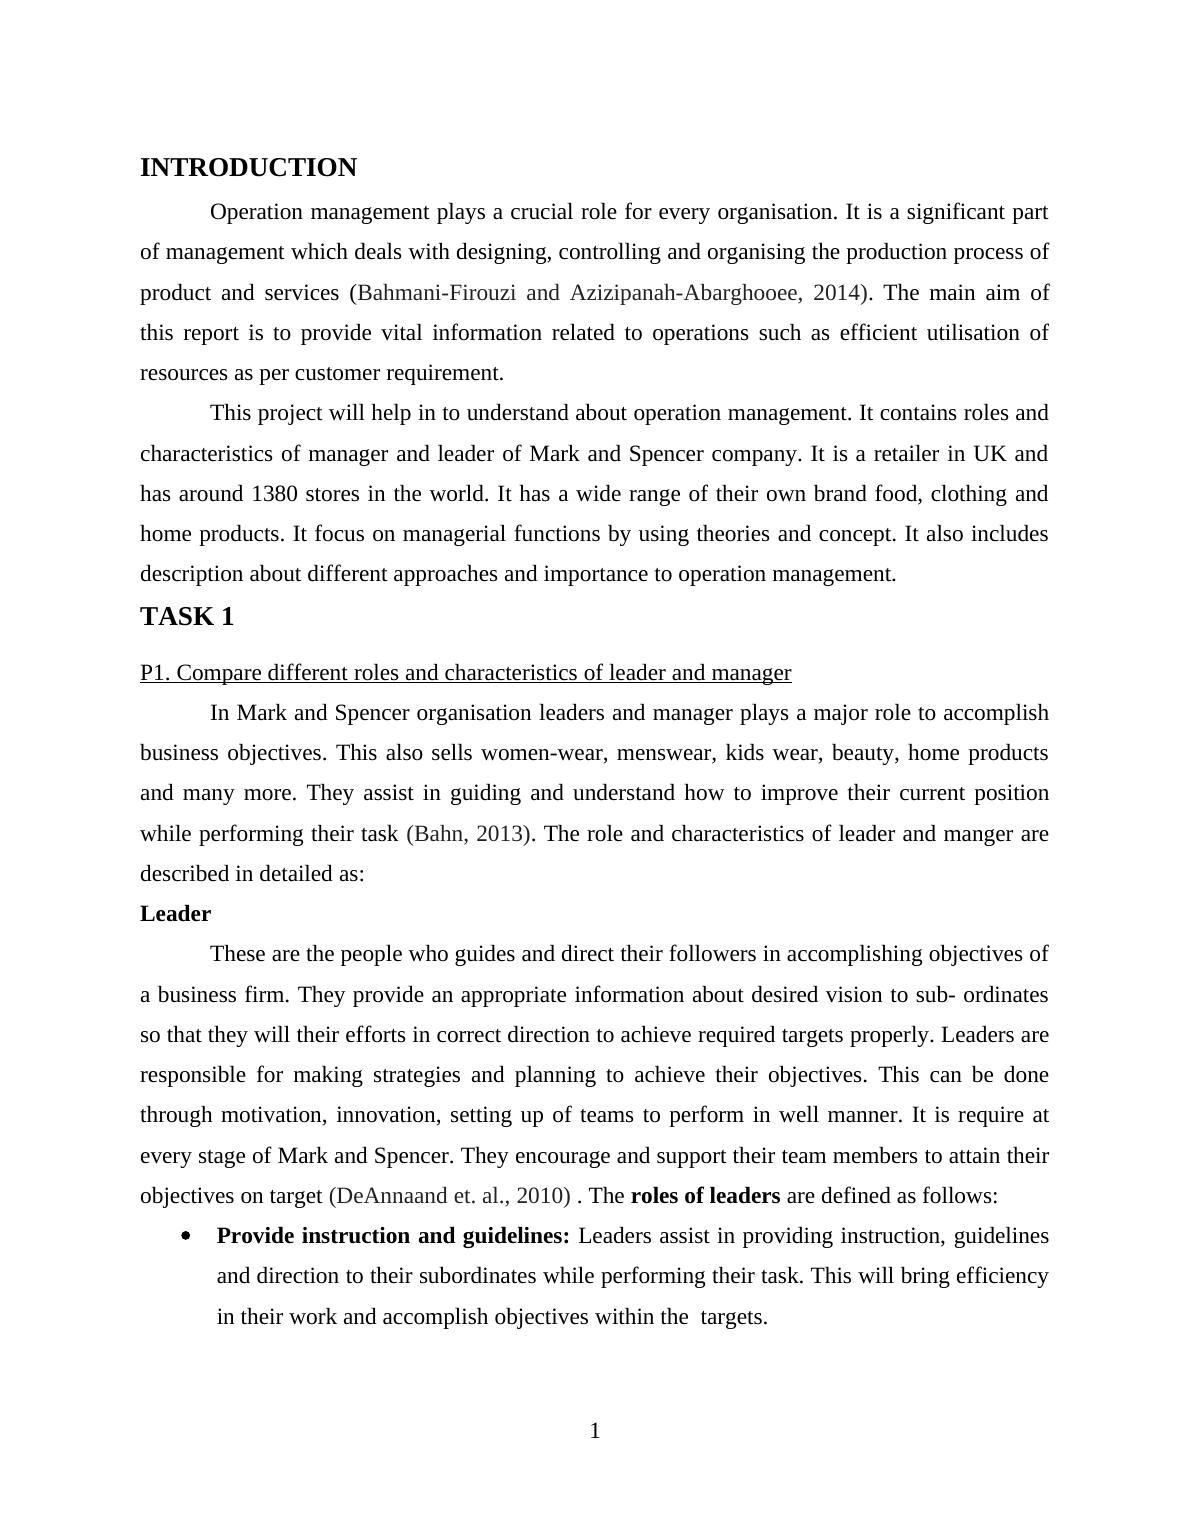 Management and Operations Assignment PDF : Mark and Spencer_3